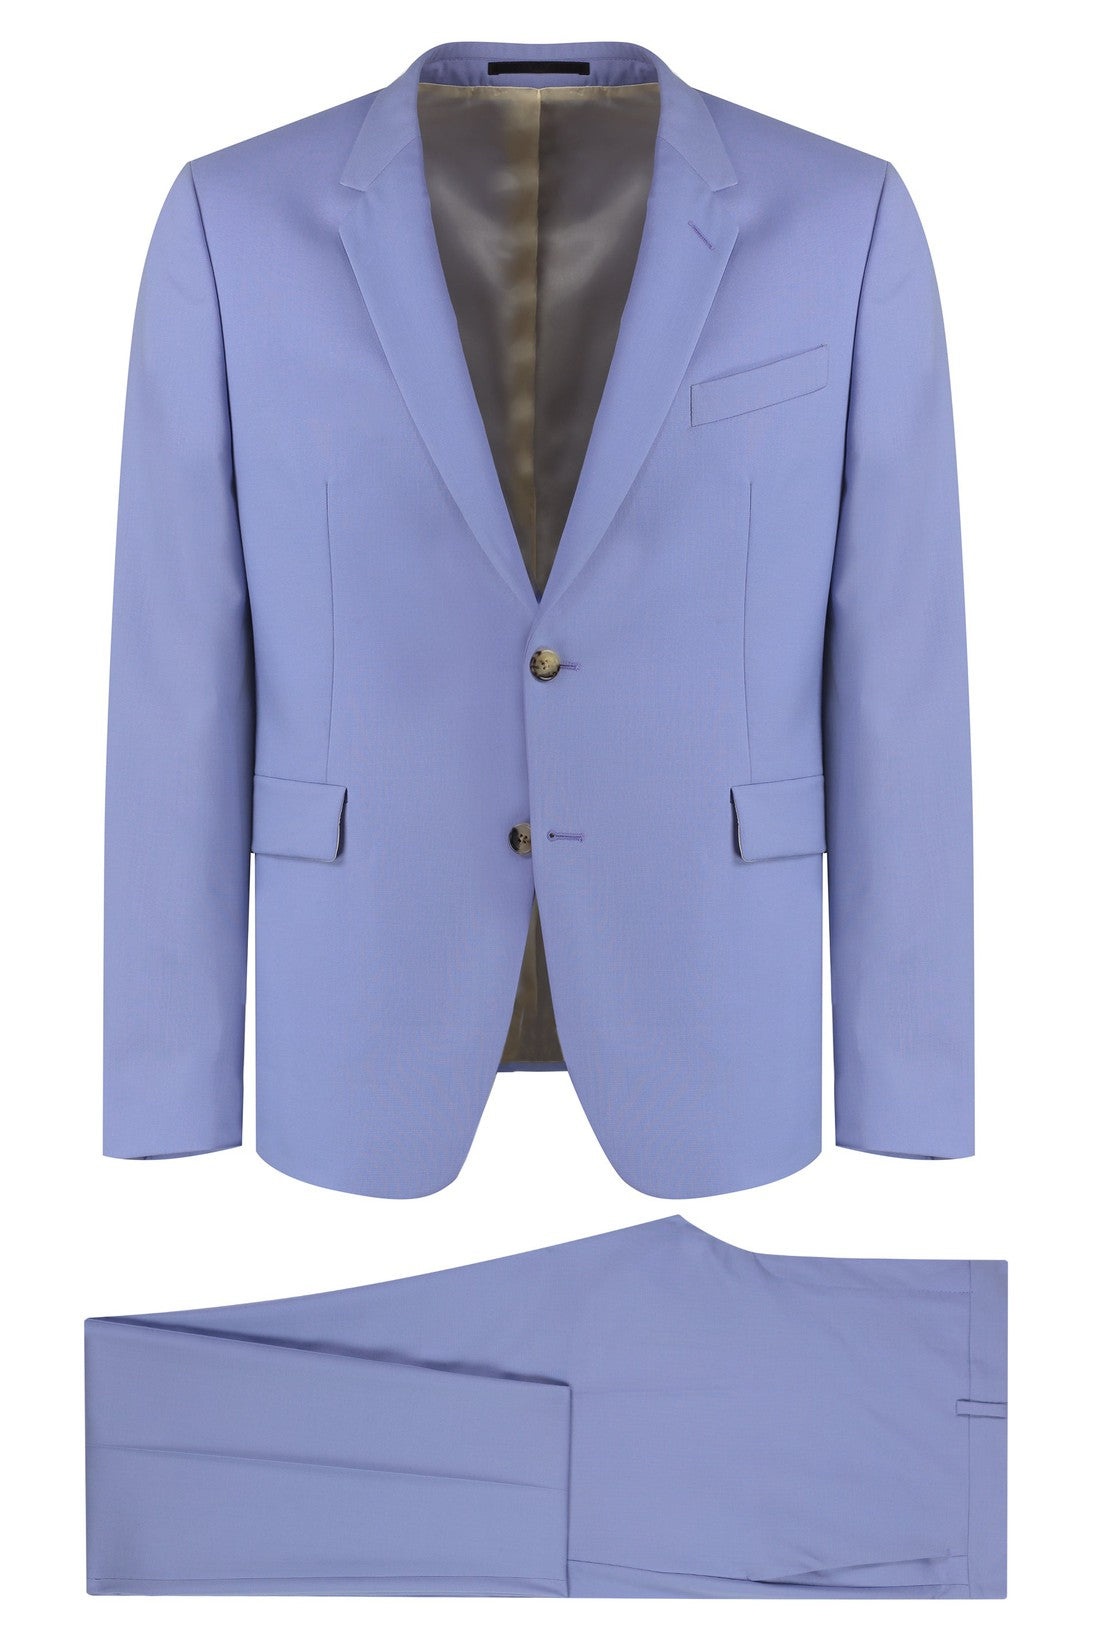 Paul Smith-OUTLET-SALE-Wool and mohair two piece suit-ARCHIVIST